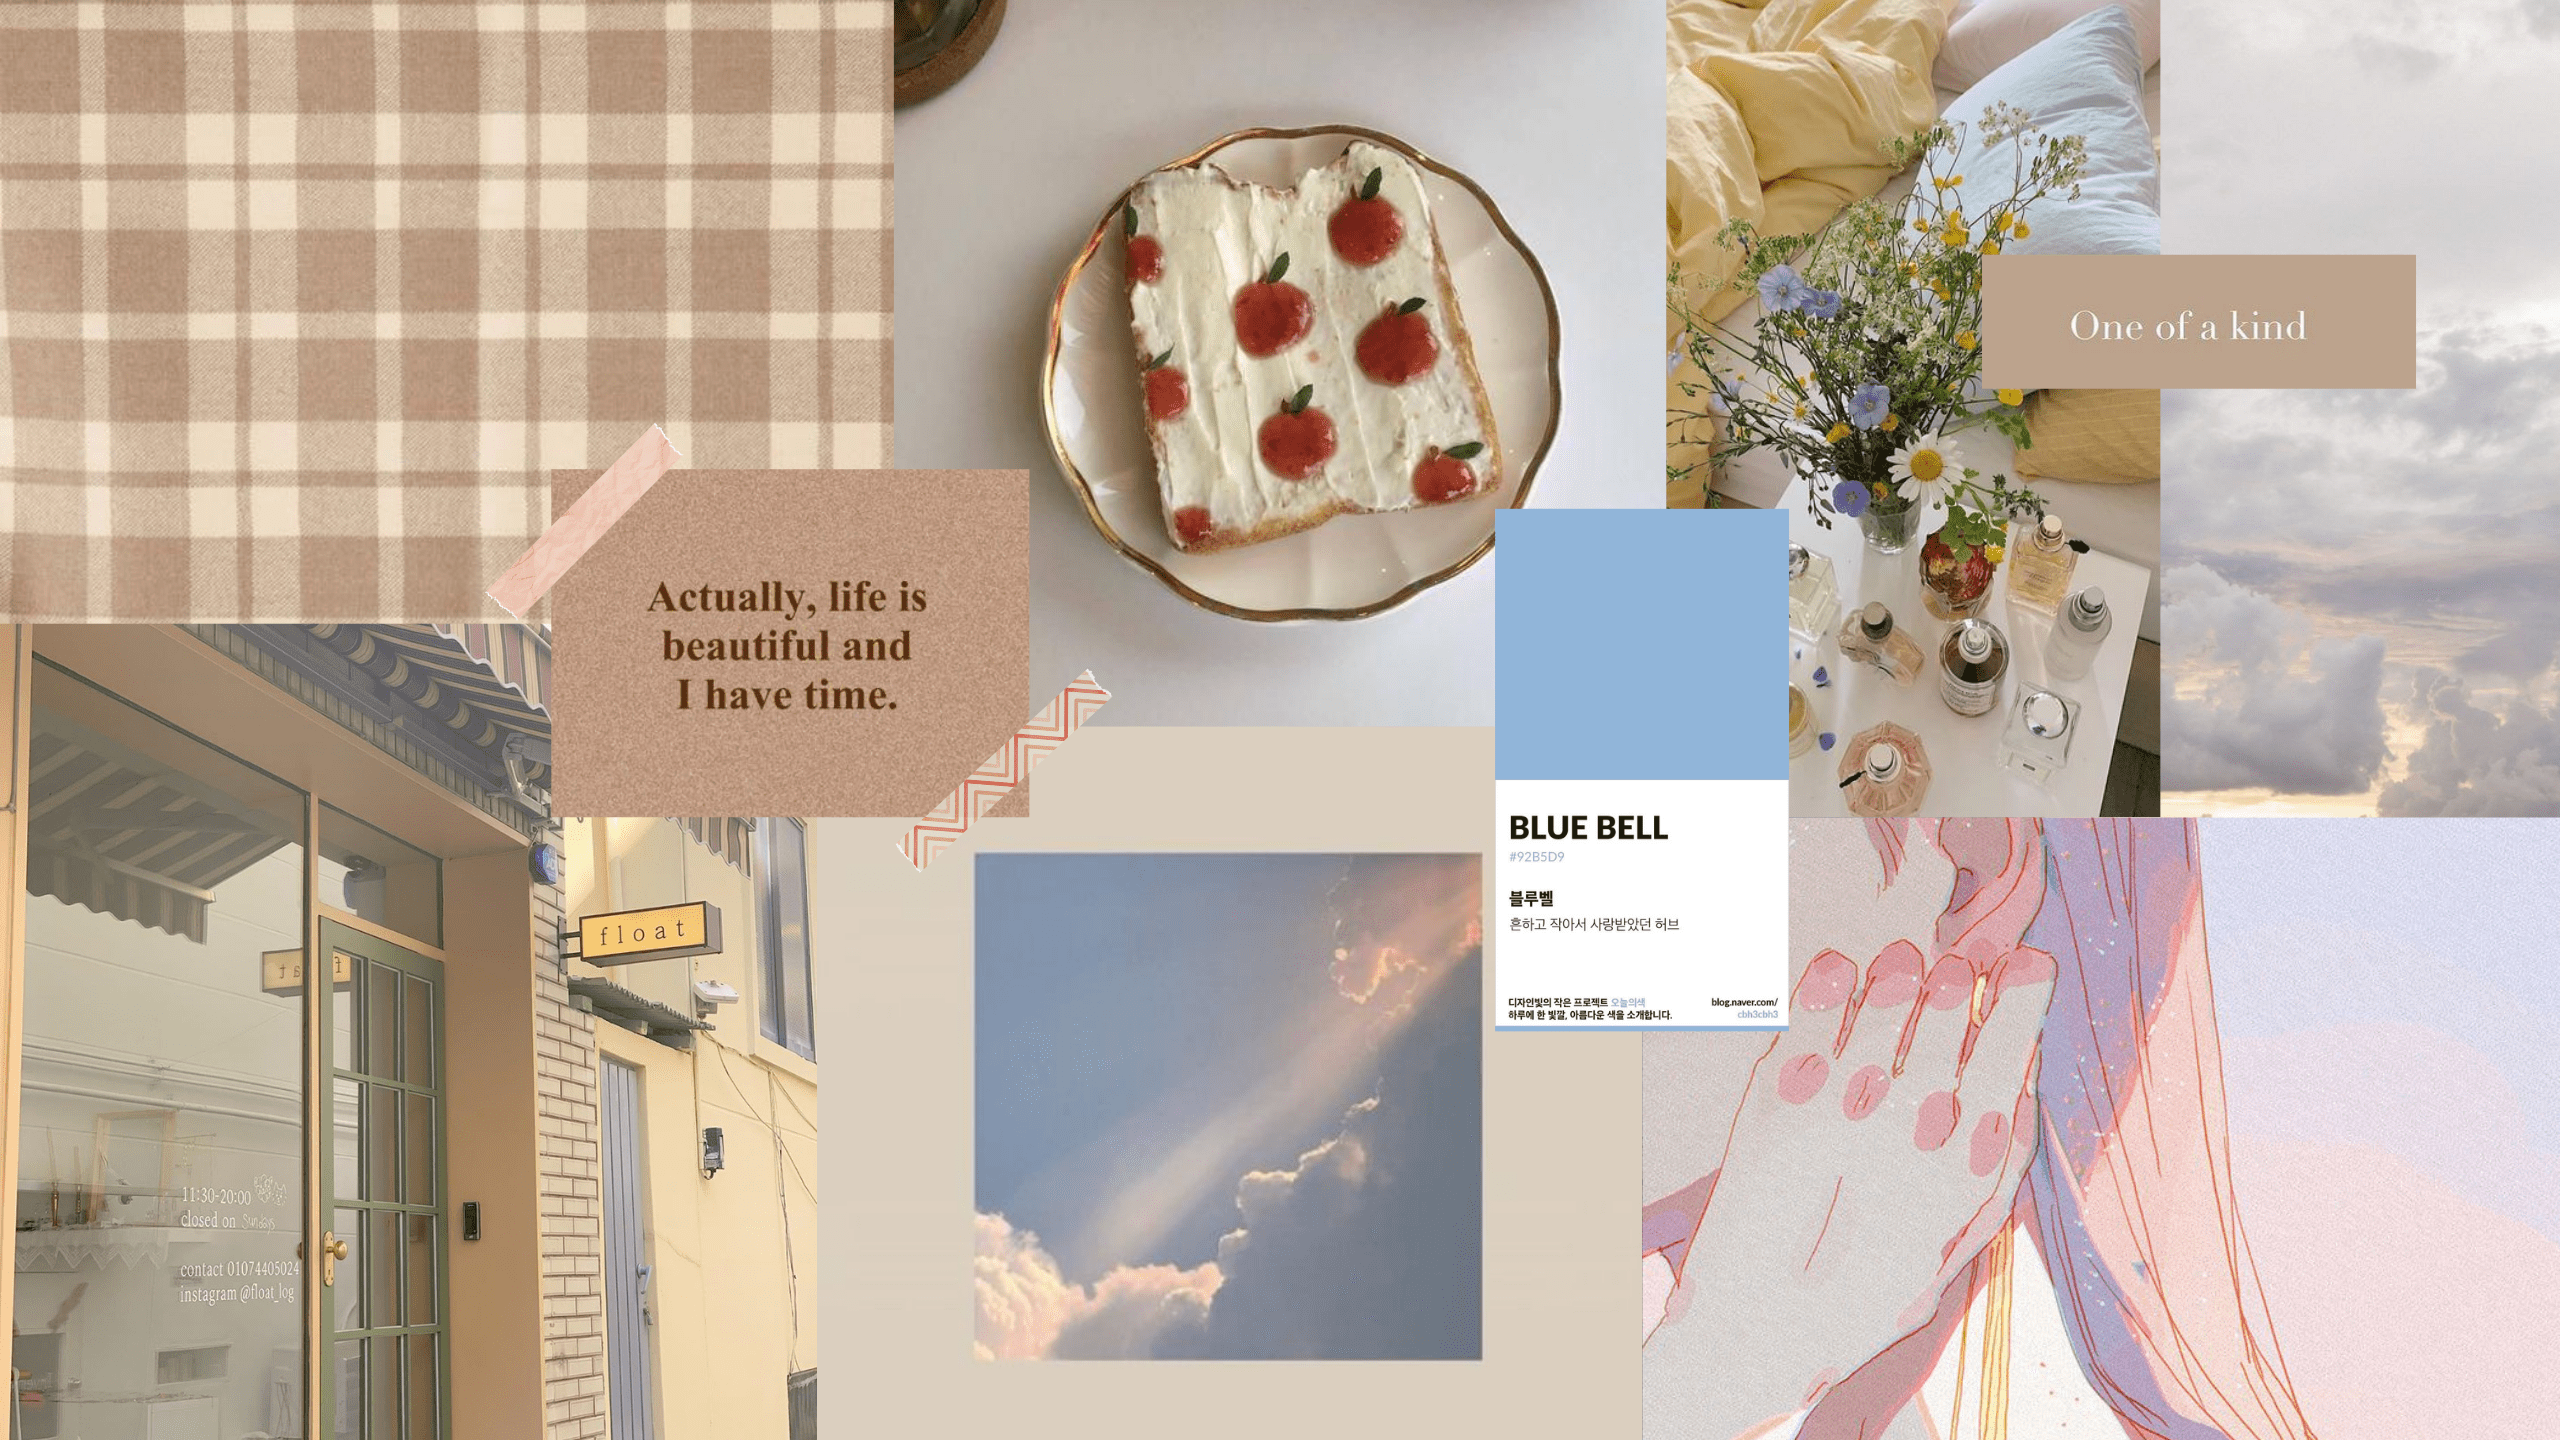 A mood board featuring a range of images including food, a window, a sunset, and a quote. - Desktop, laptop